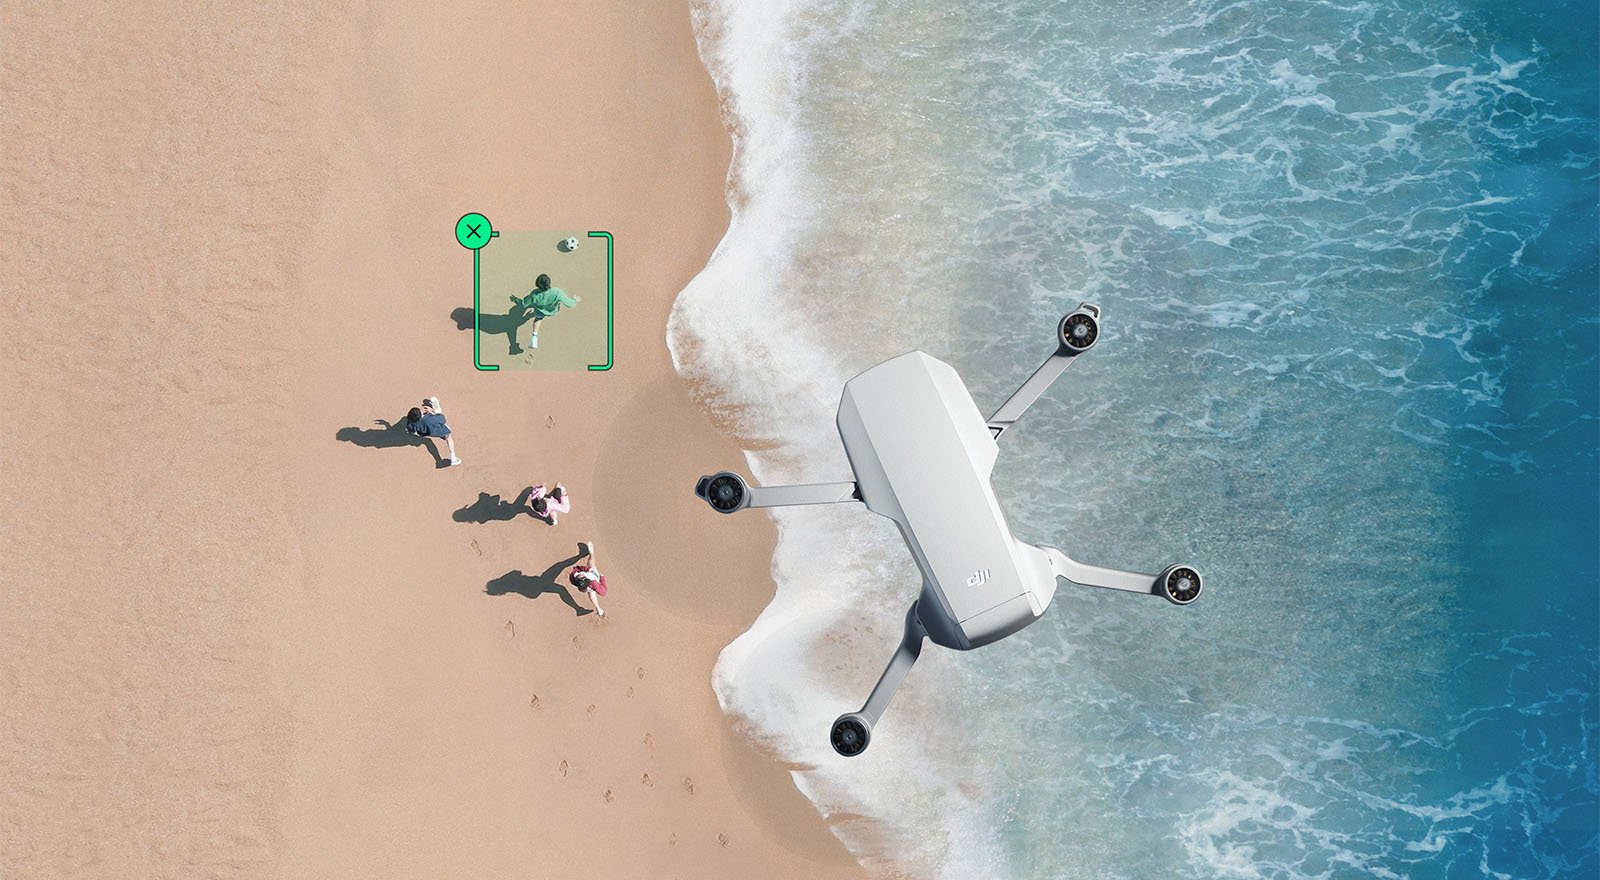 Aerial view of a sandy beach with waves gently lapping the shore.  A large drone is placed on the sand, surrounded by onlookers.  a man sits on a green carpet nearby, piloting an airplane.